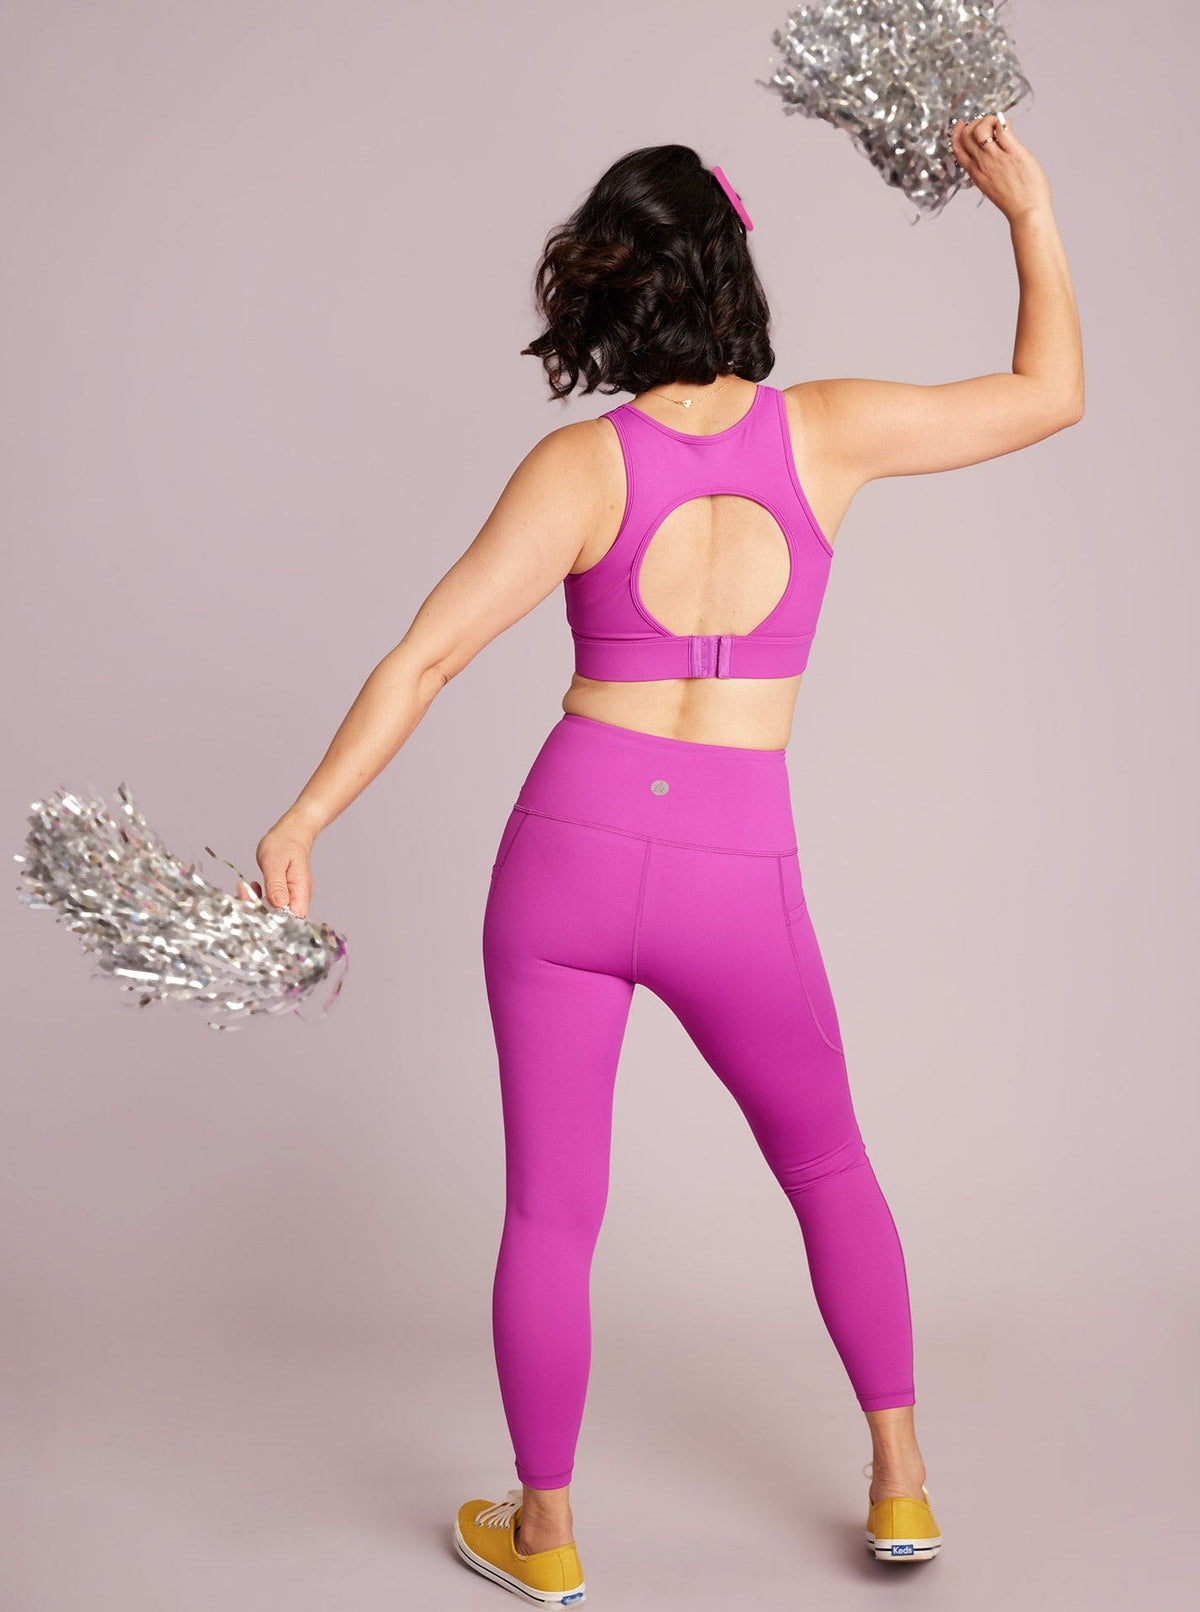 Magical Magenta Everyday Legging - 7/8 length - no see through colourful leggings with pockets